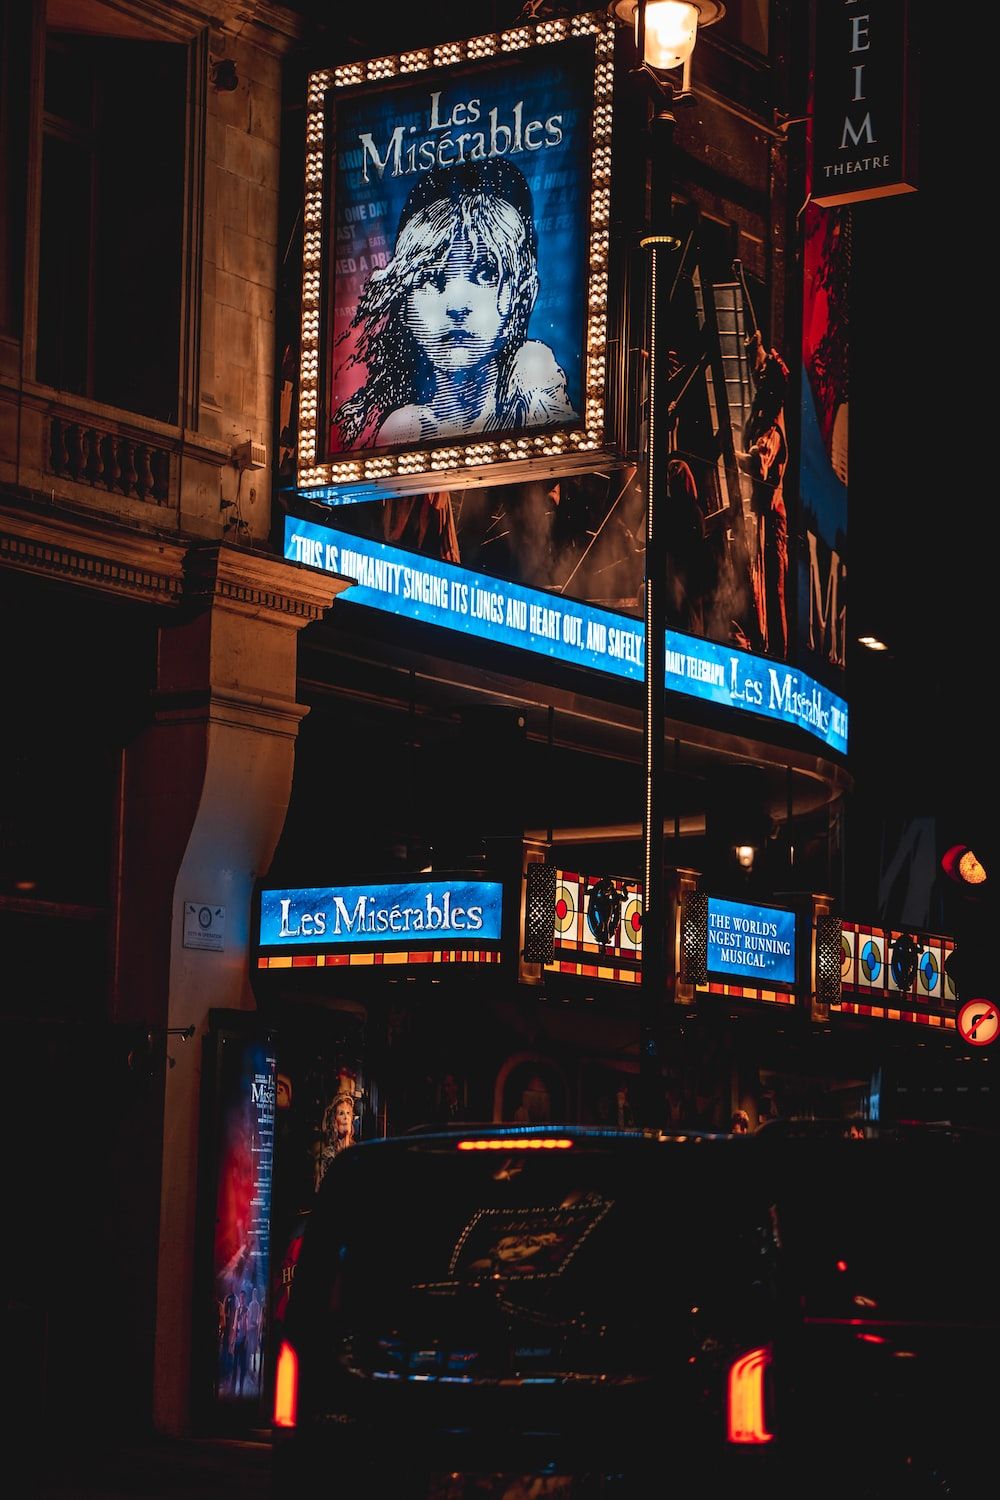 Broadway Theatre Picture. Download Free Image